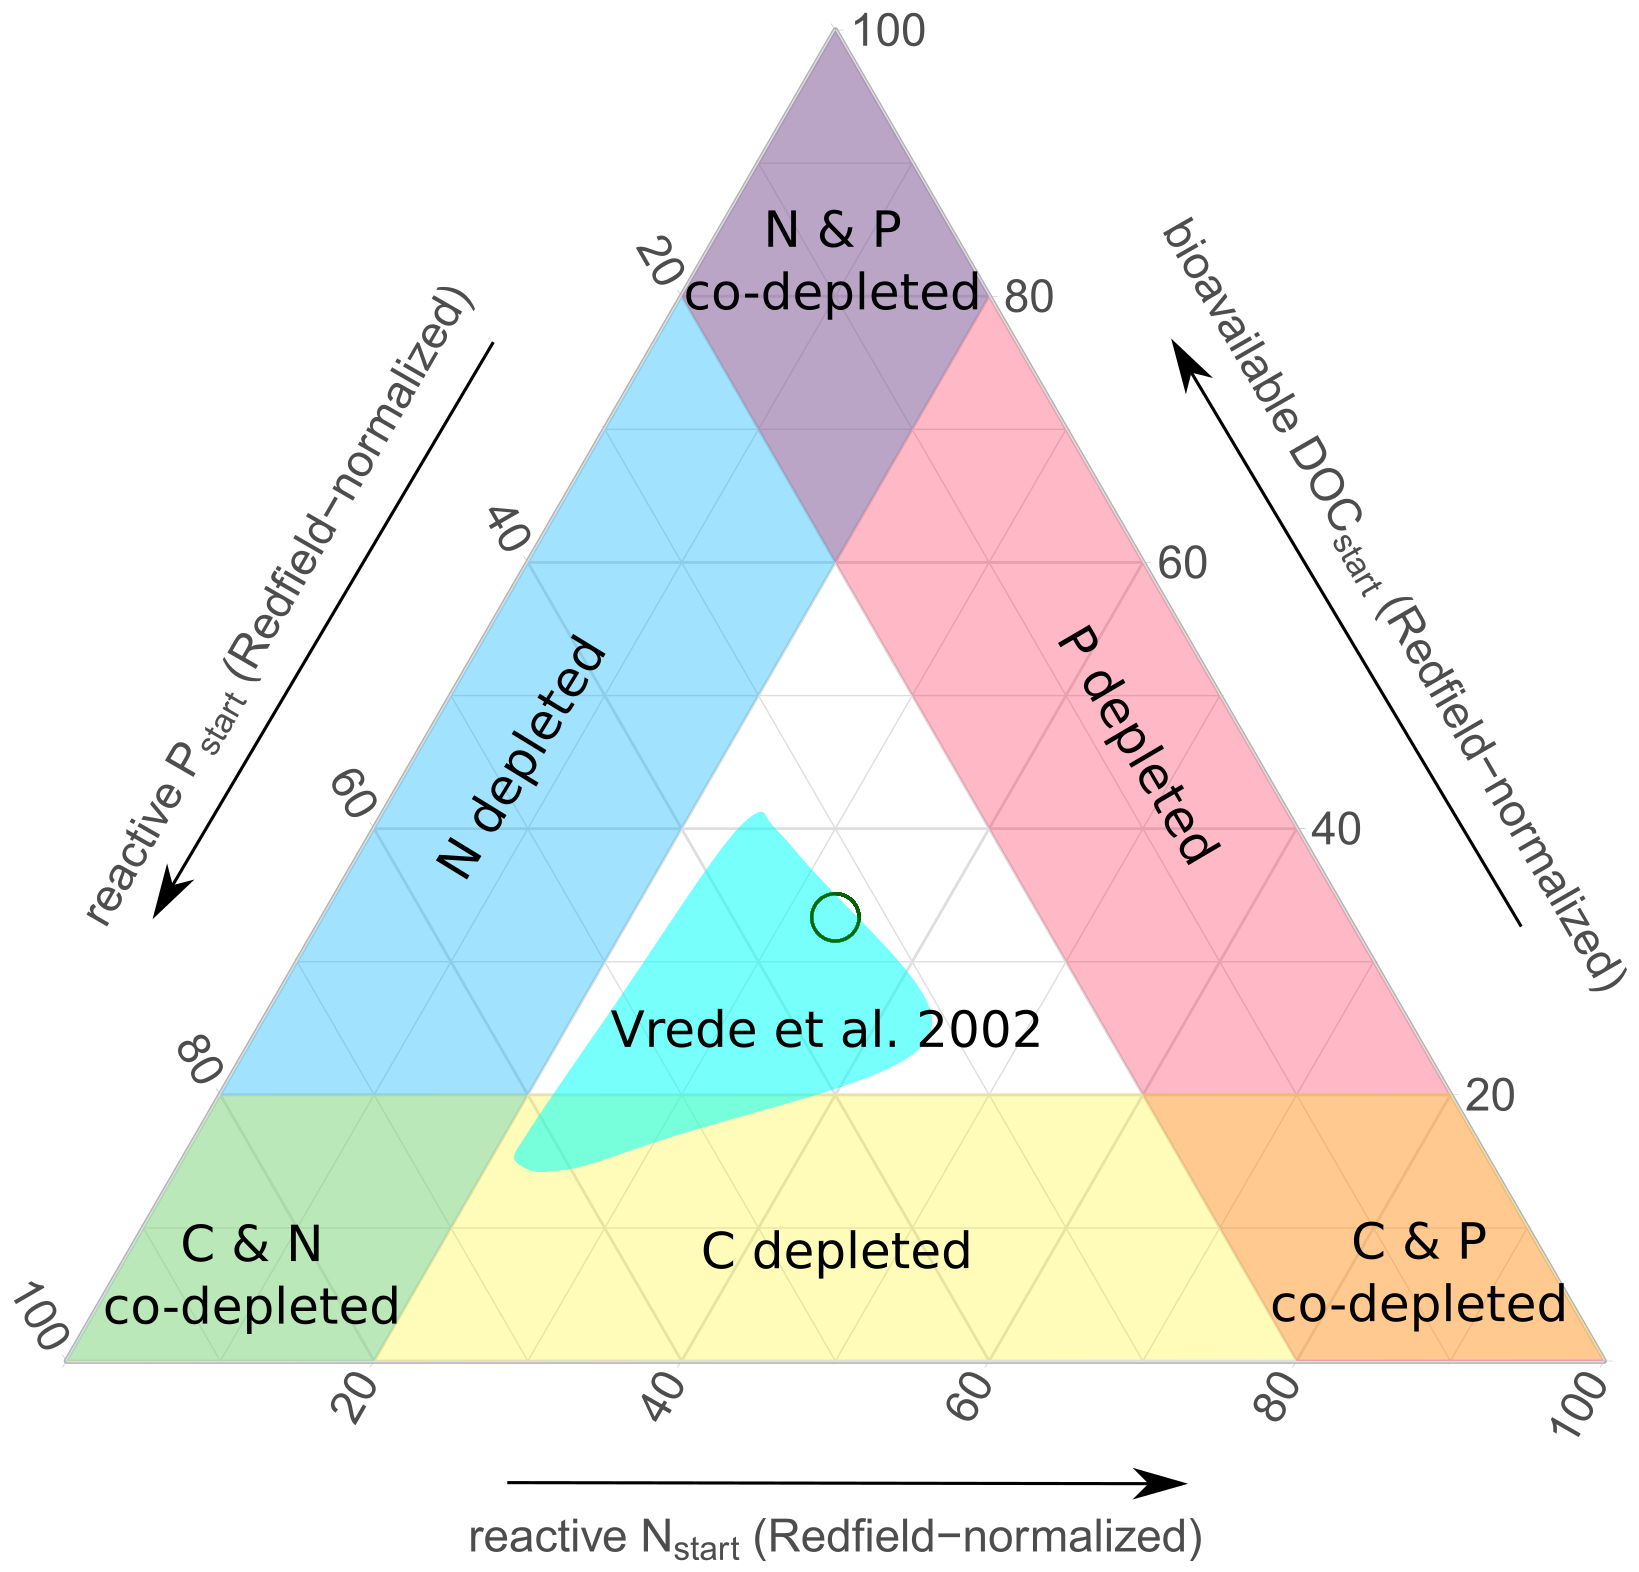 Conceptual classification of CNP ratios with a ternary plot (from Graeber et al., 2021)